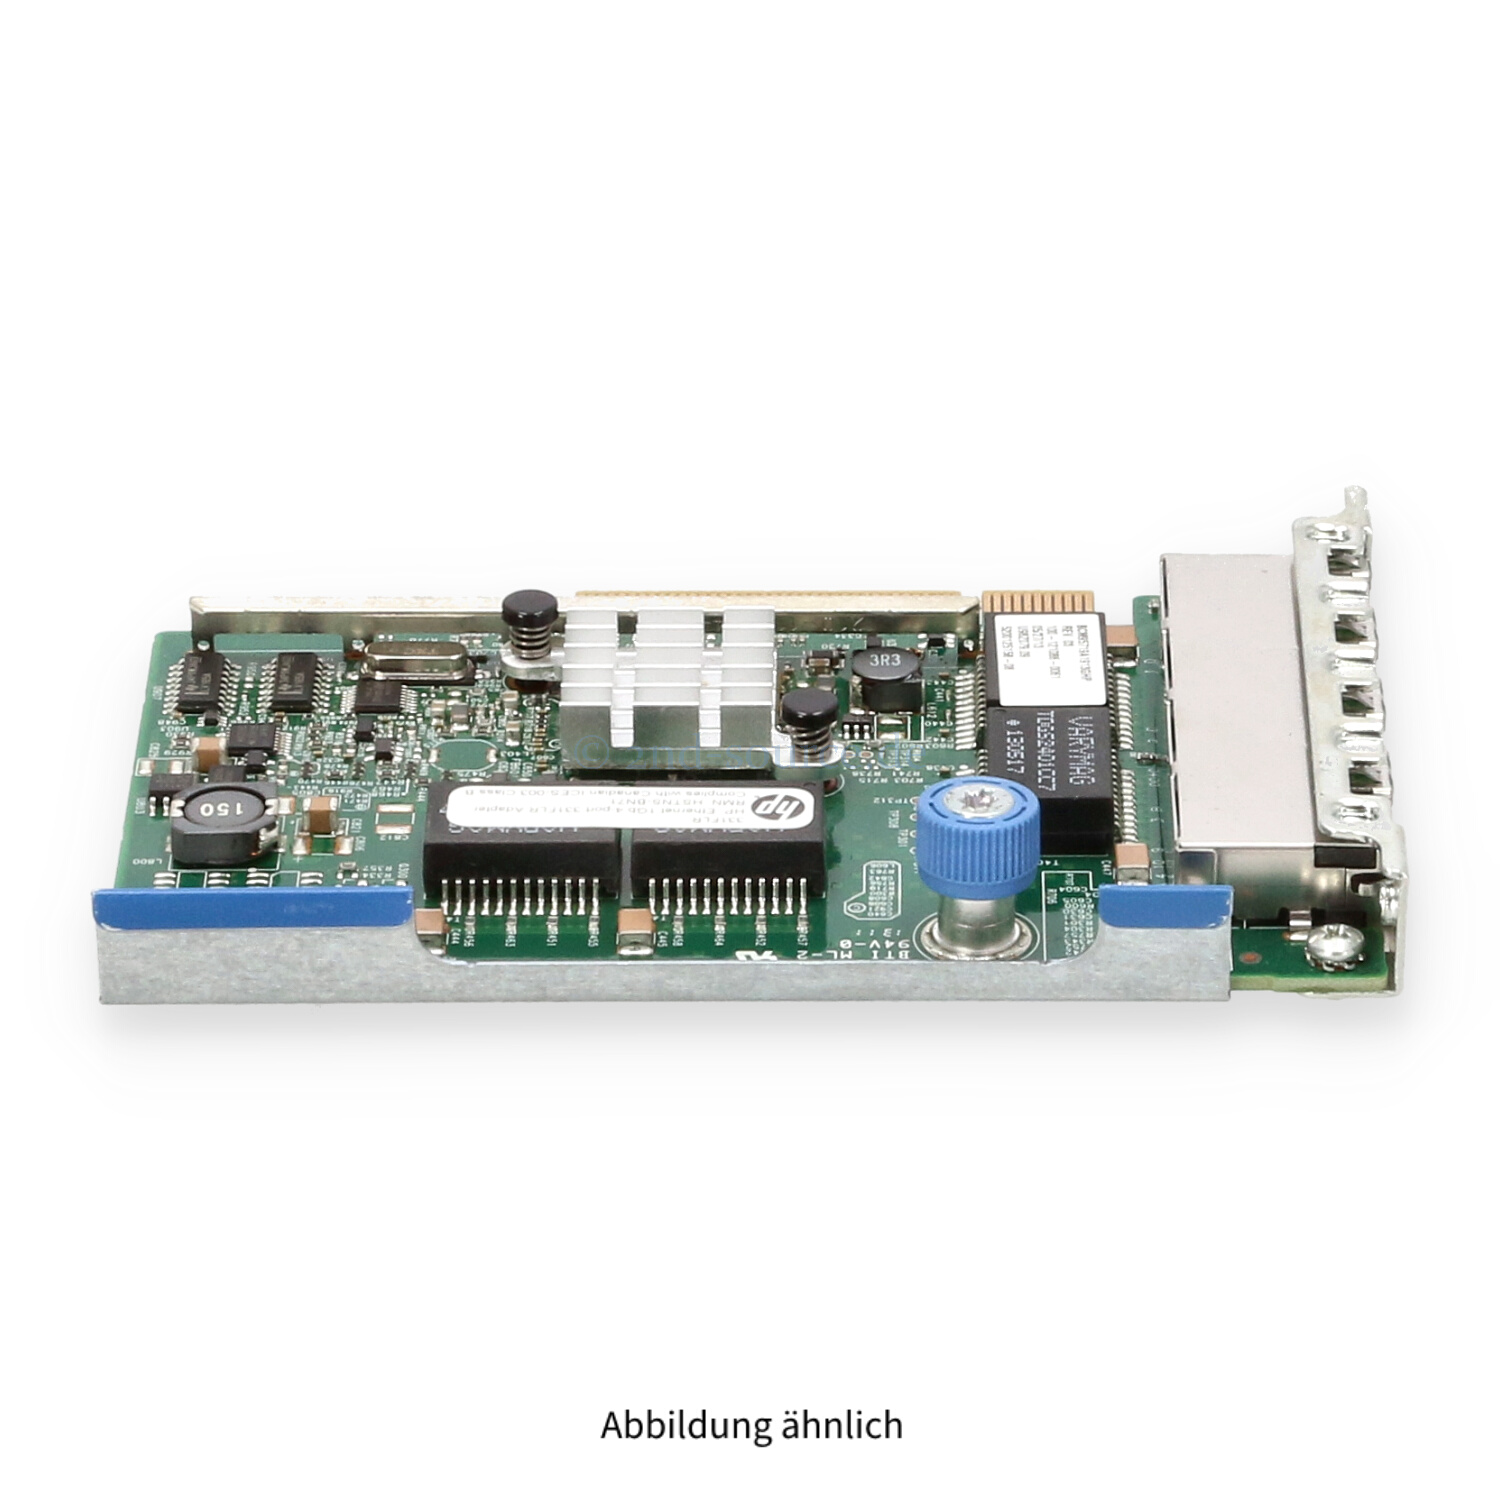 HPE 331FLR-T 4x 1GbE Server Ethernet Adapter 629135-B21 634025-001 629133-001